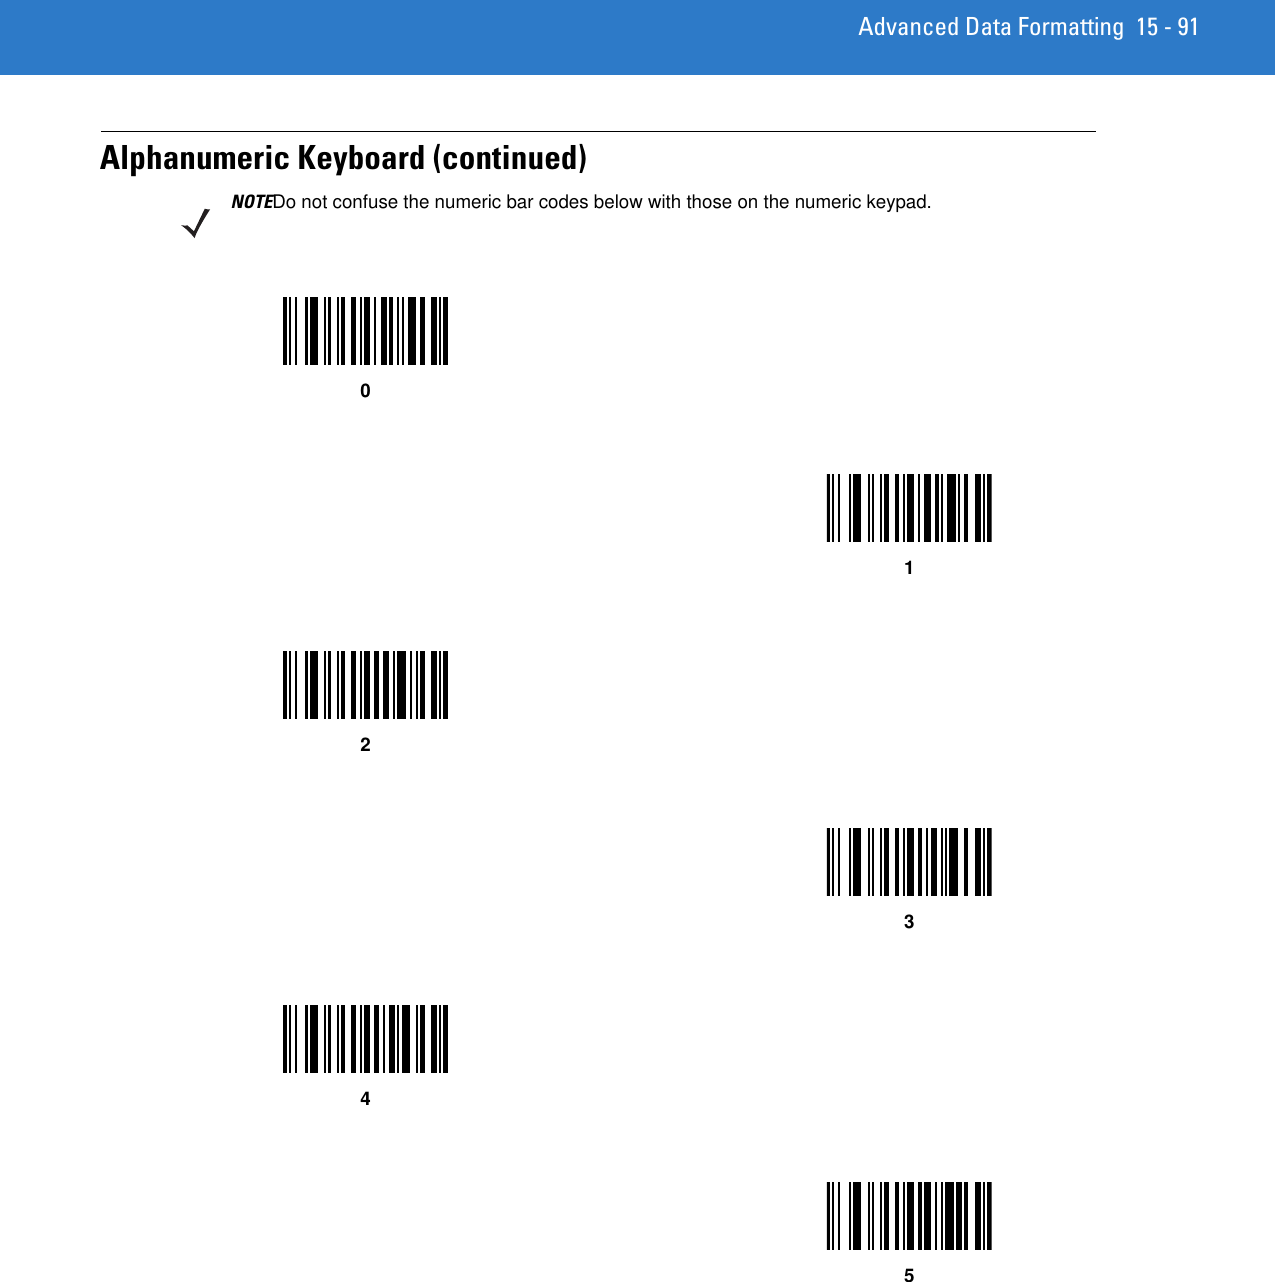 Advanced Data Formatting 15 - 91Alphanumeric Keyboard (continued)NOTEDo not confuse the numeric bar codes below with those on the numeric keypad.012345